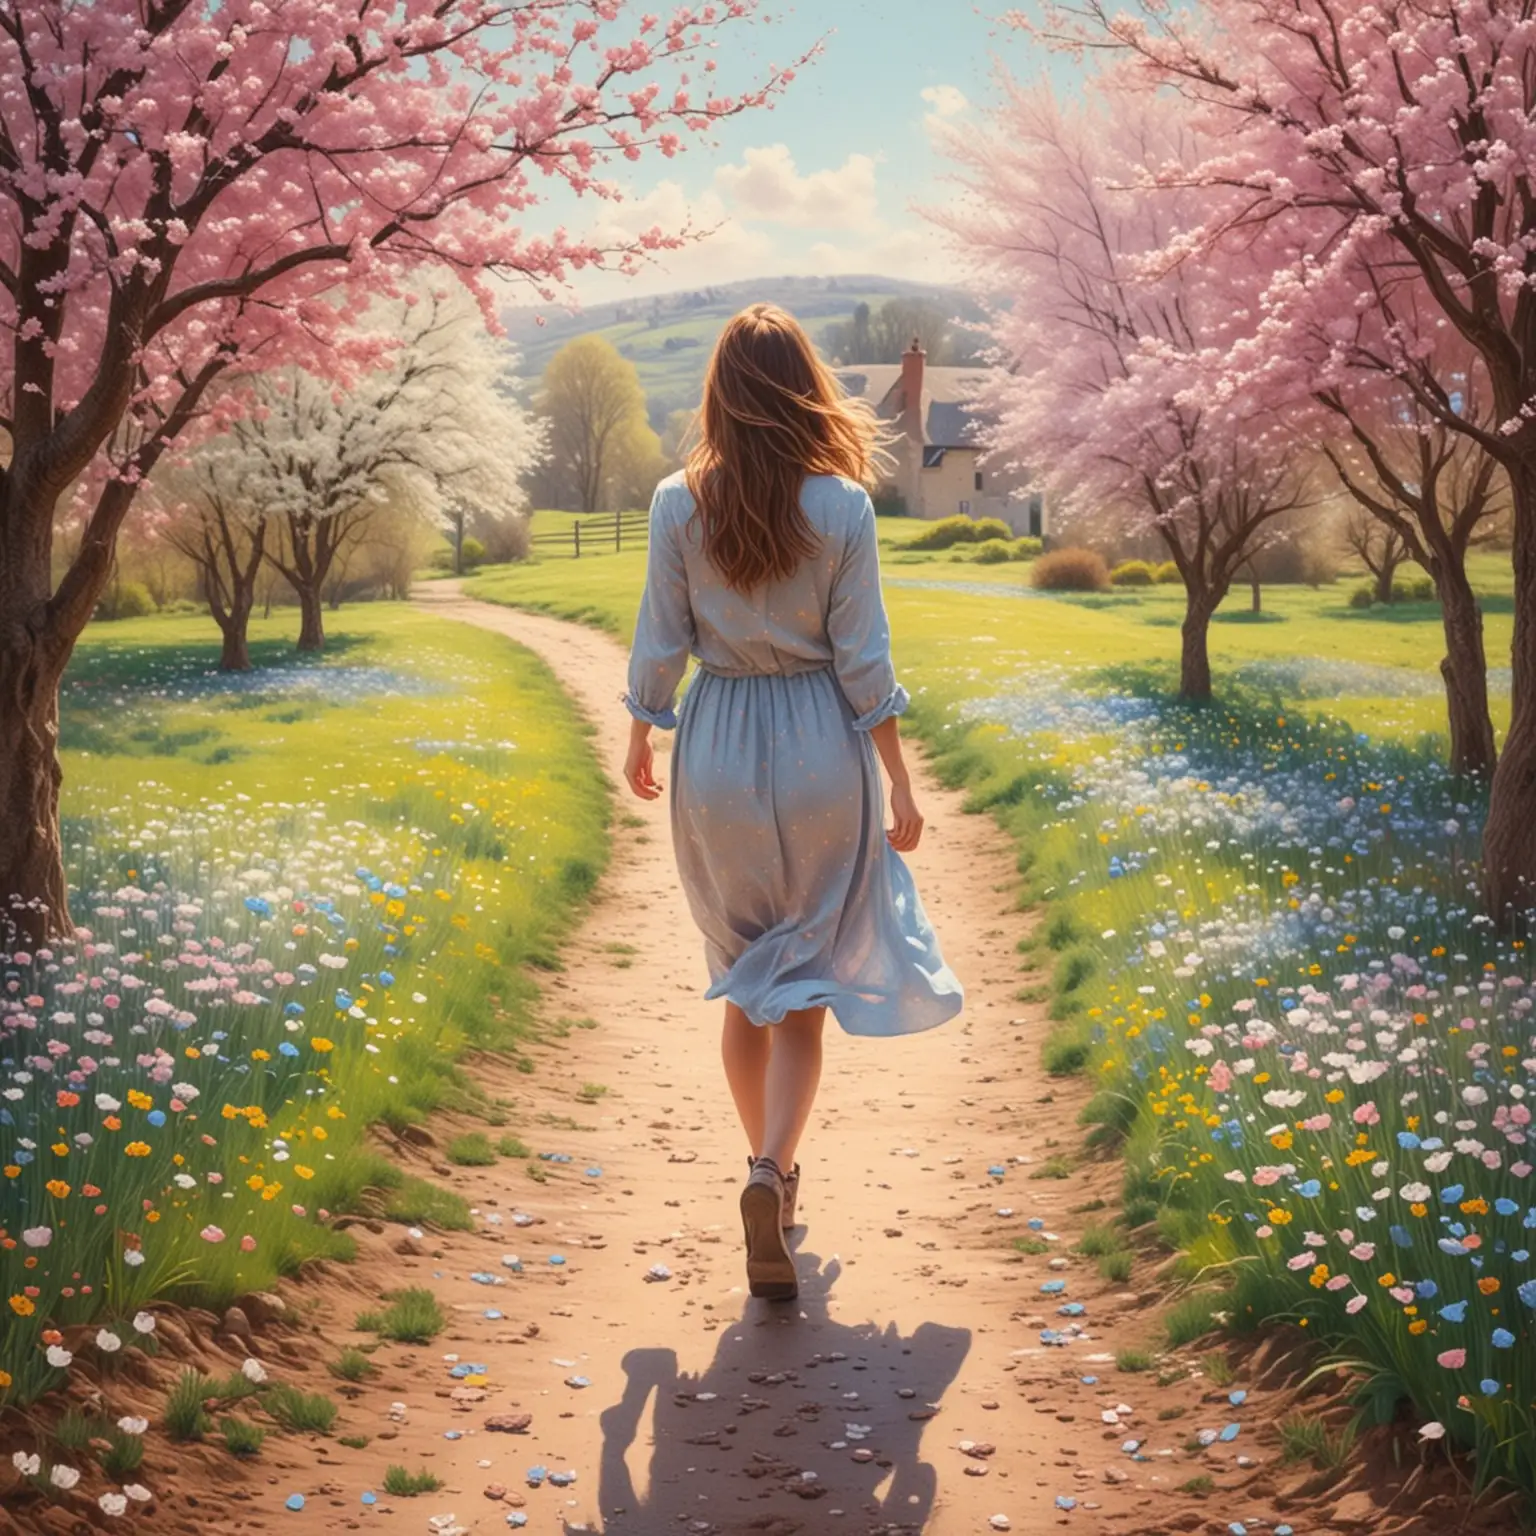 spring time at the country side in europe, a woman walking, petals flying,soft pastel crayon colors, thomas little painting style